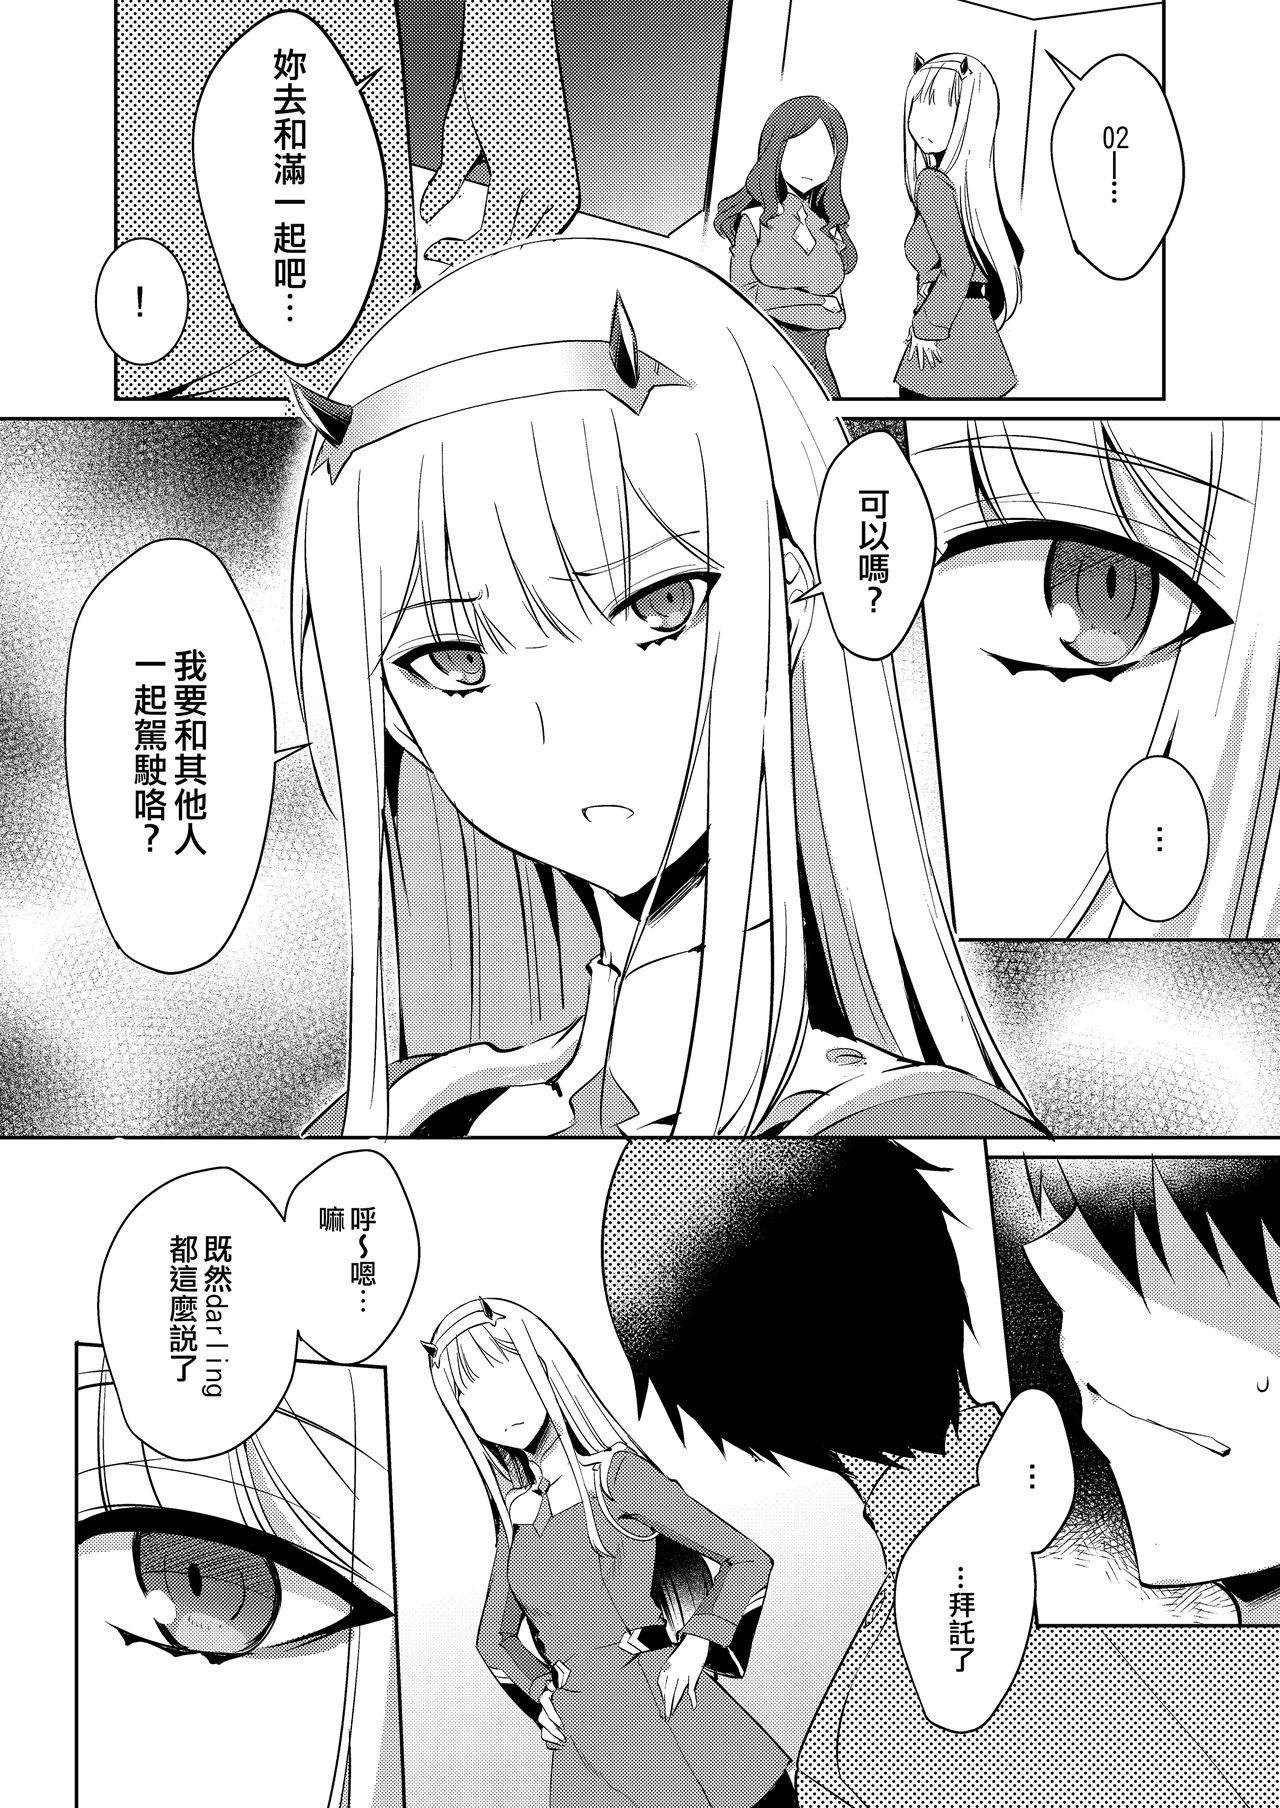 Shemale Sex Mitsuru in the Zero Two - Darling in the franxx Teenies - Page 5